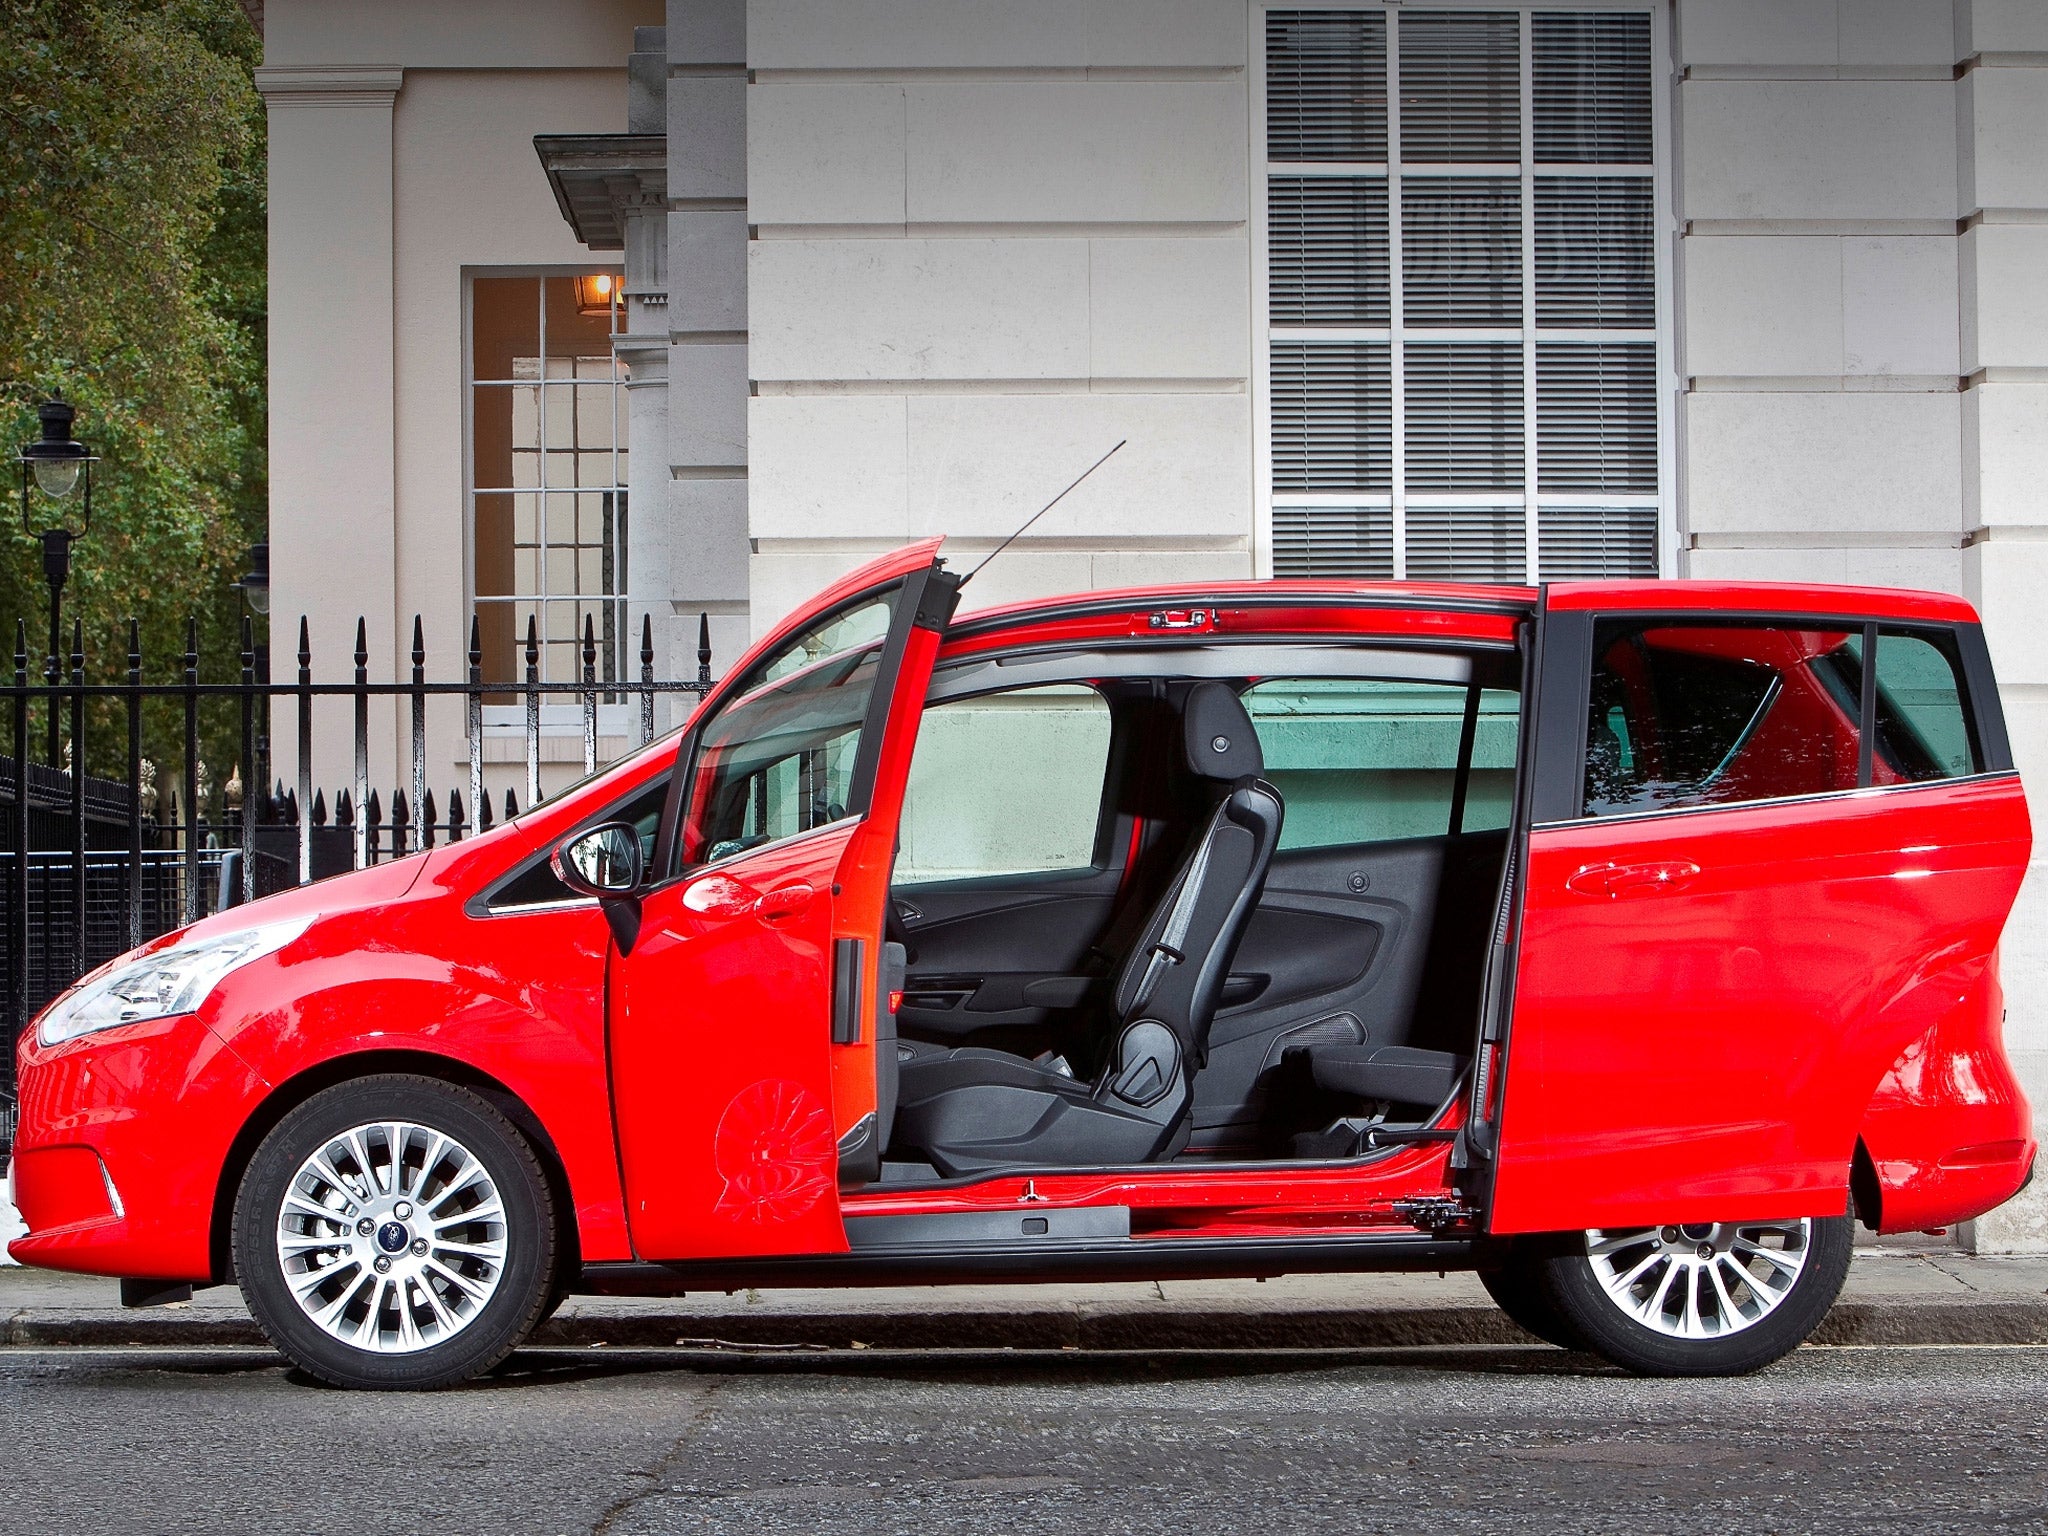 ritme ontwikkeling Betrouwbaar Motoring review: Ford B-Max | The Independent | The Independent